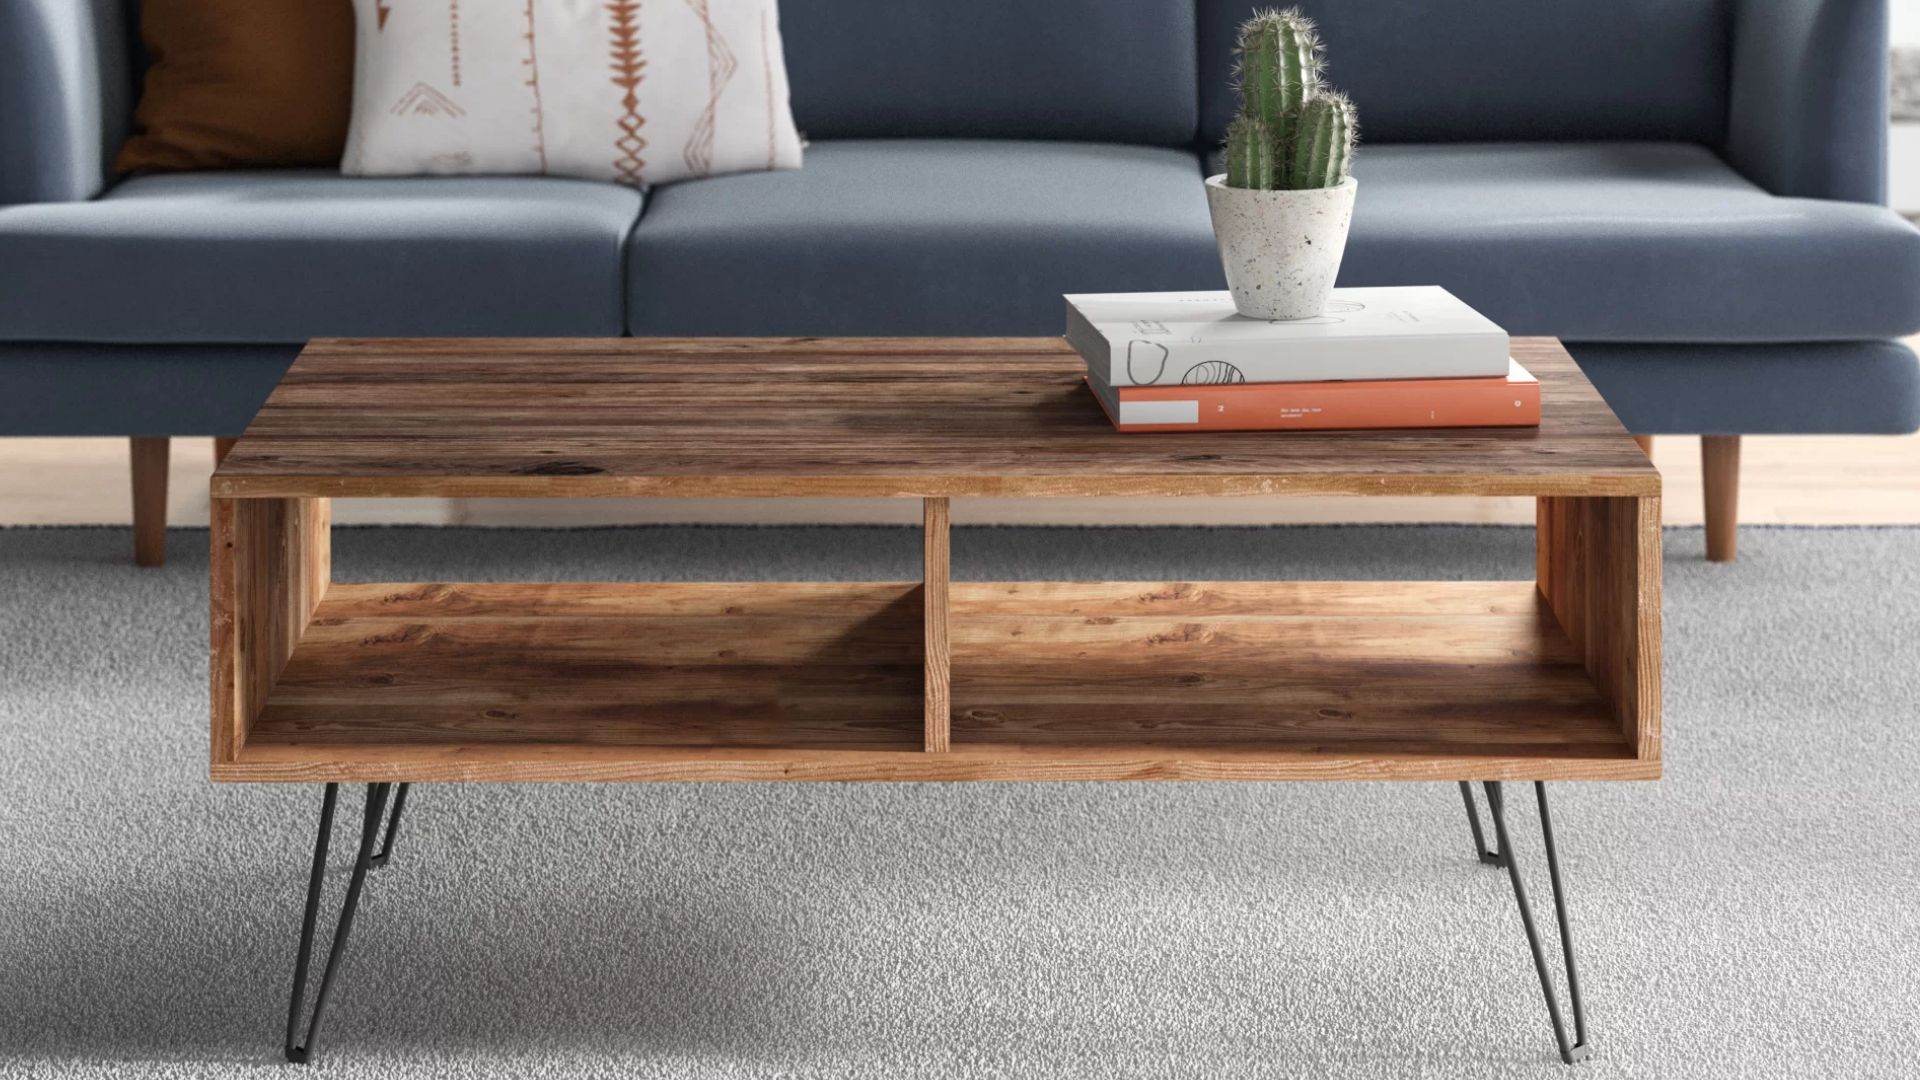 15 Coffee Tables With Storage Throughout Coffee Tables With Storage (View 14 of 20)